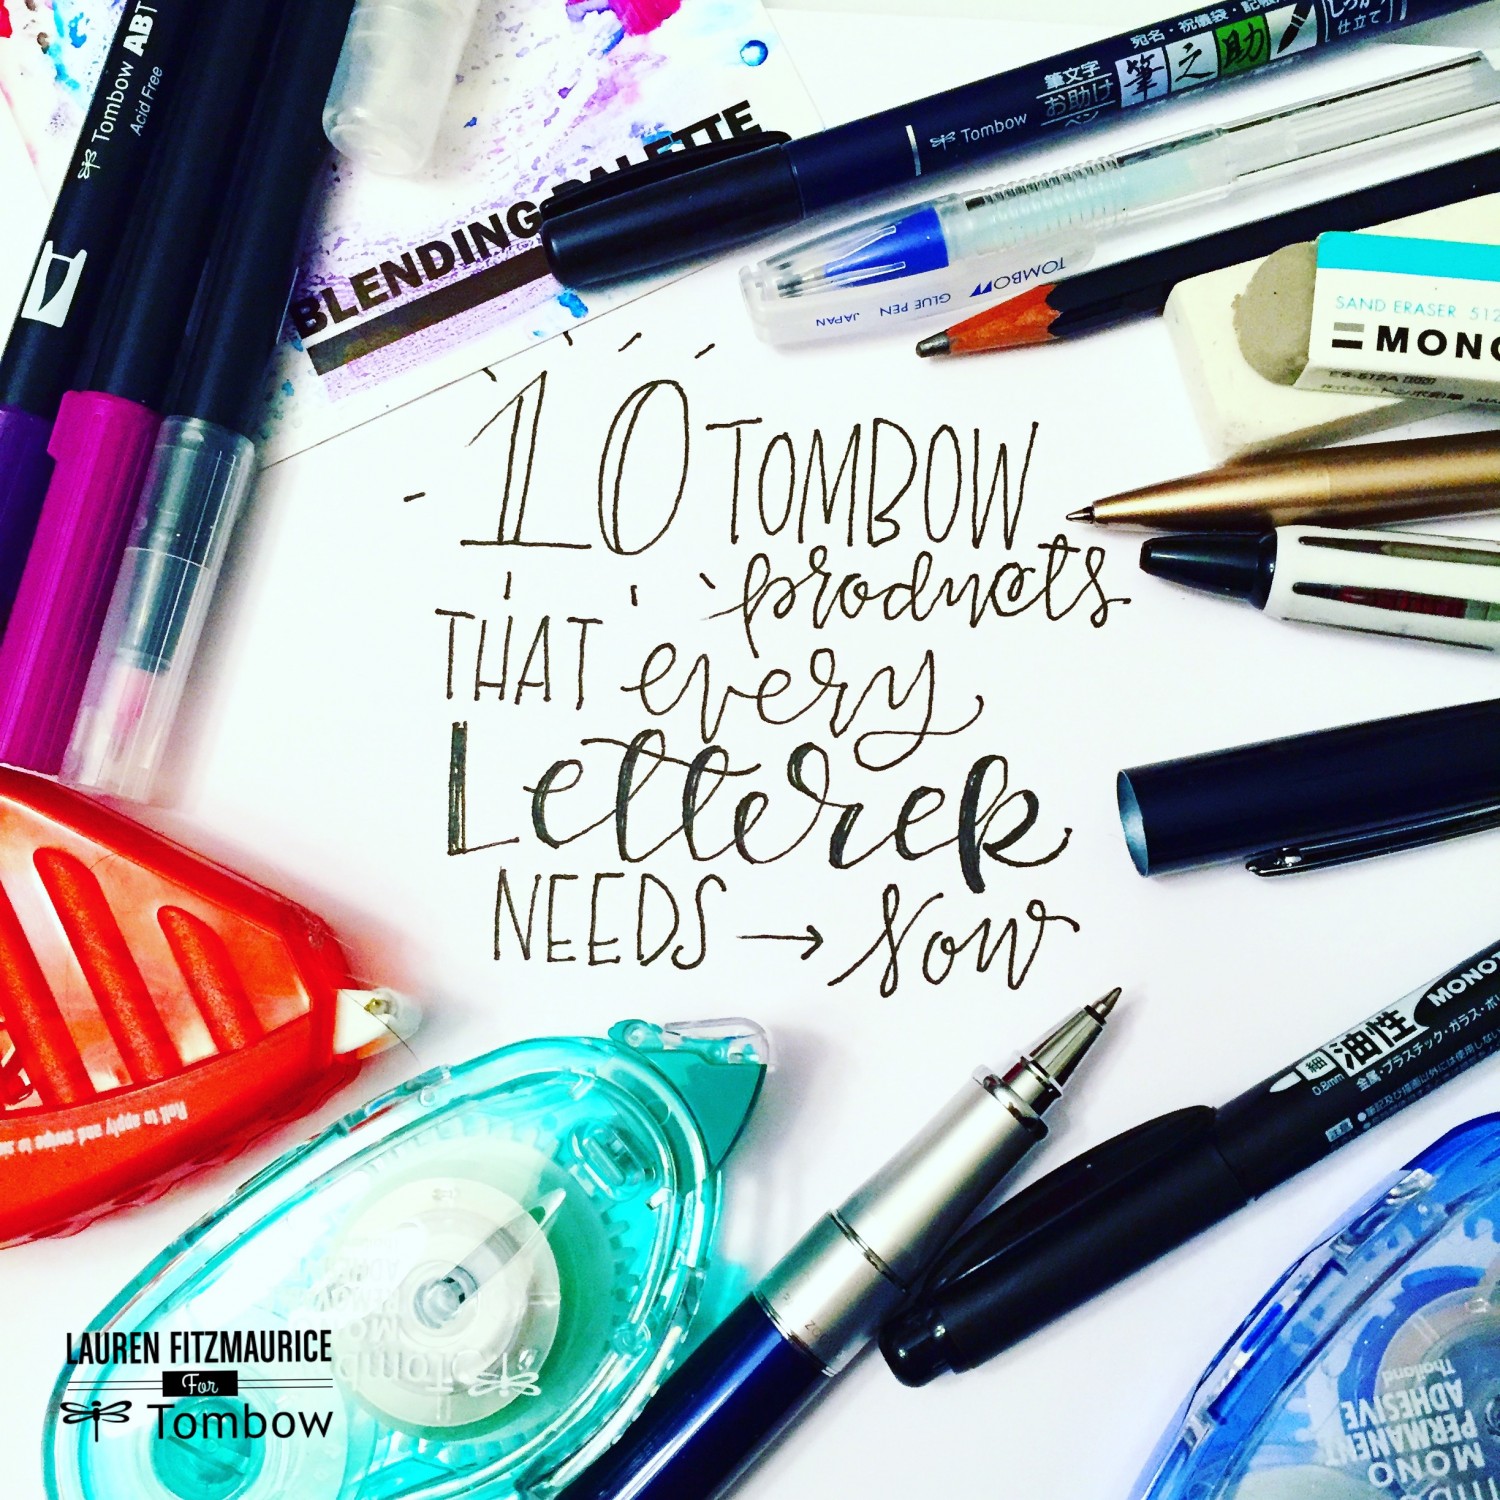 Top 10 tools every letterer needs!